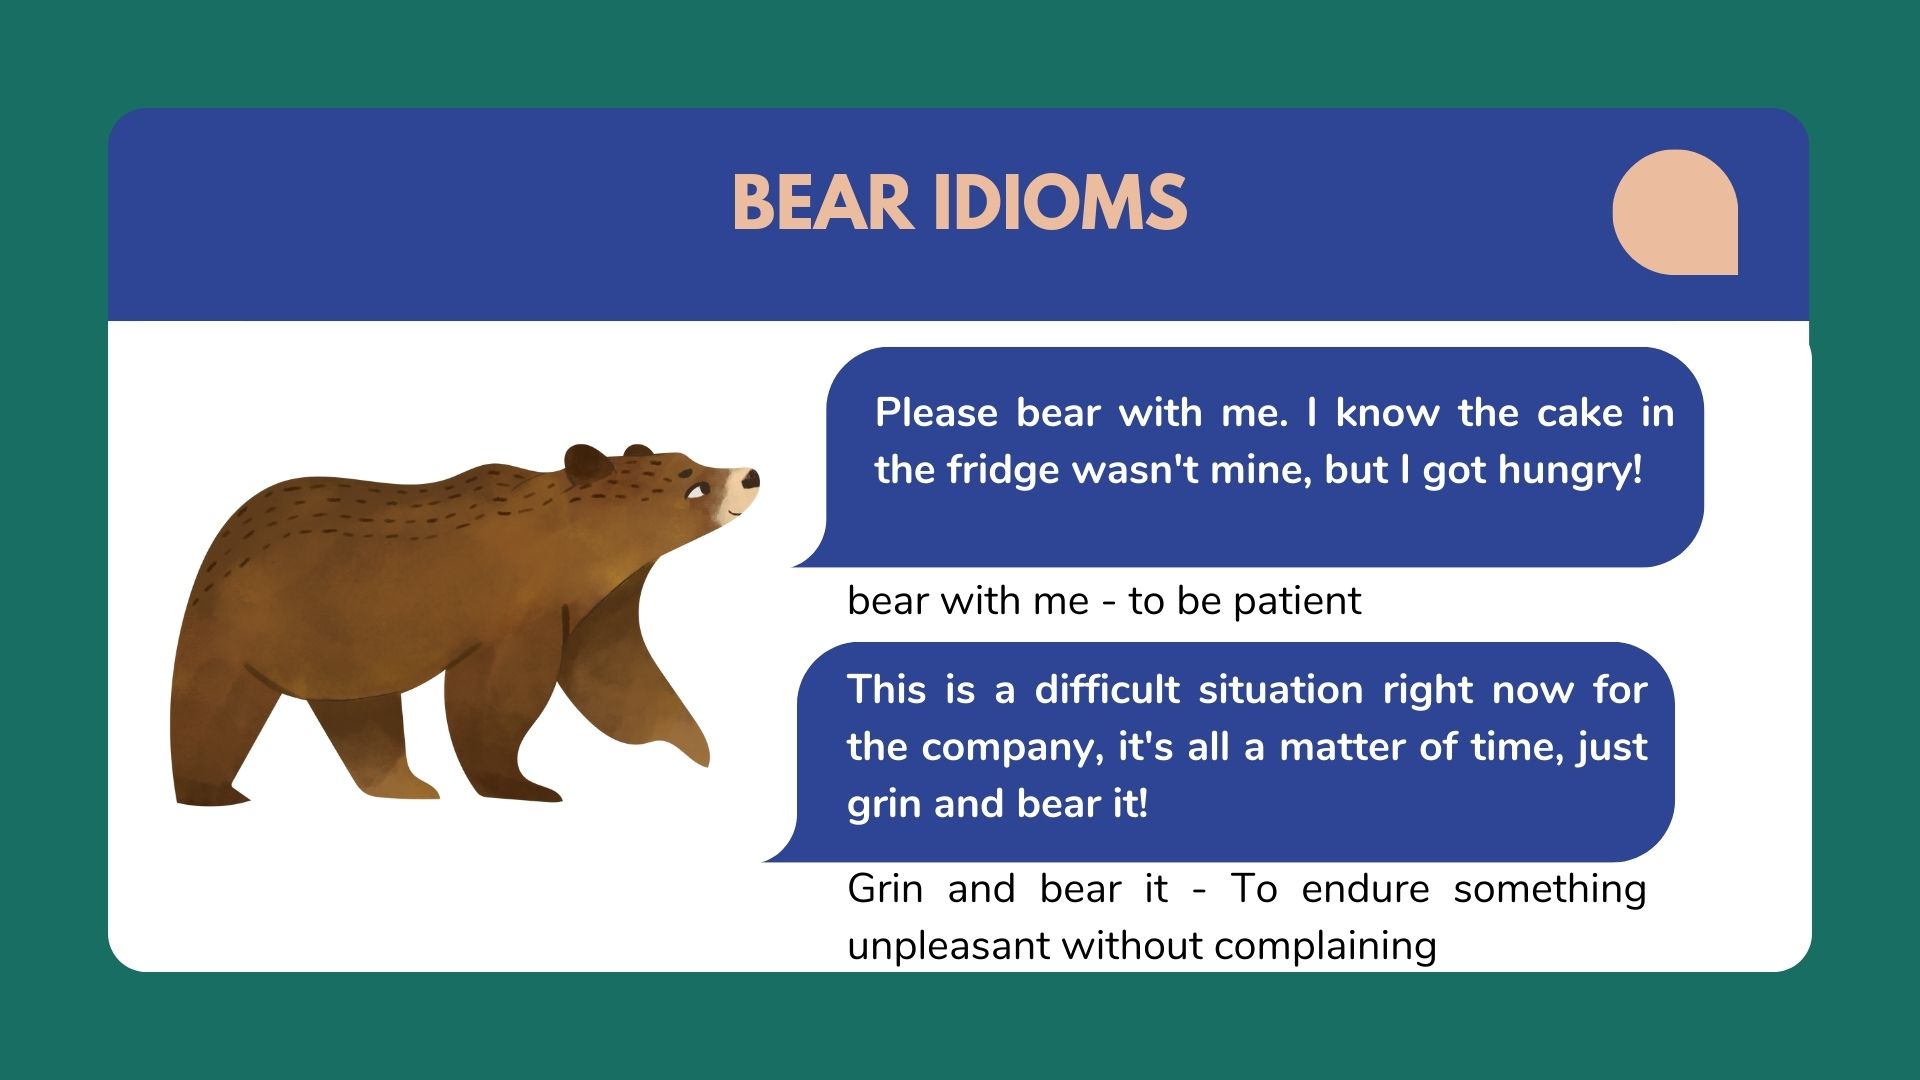 25 Bear Idioms and Phrases Explained - Owlcation